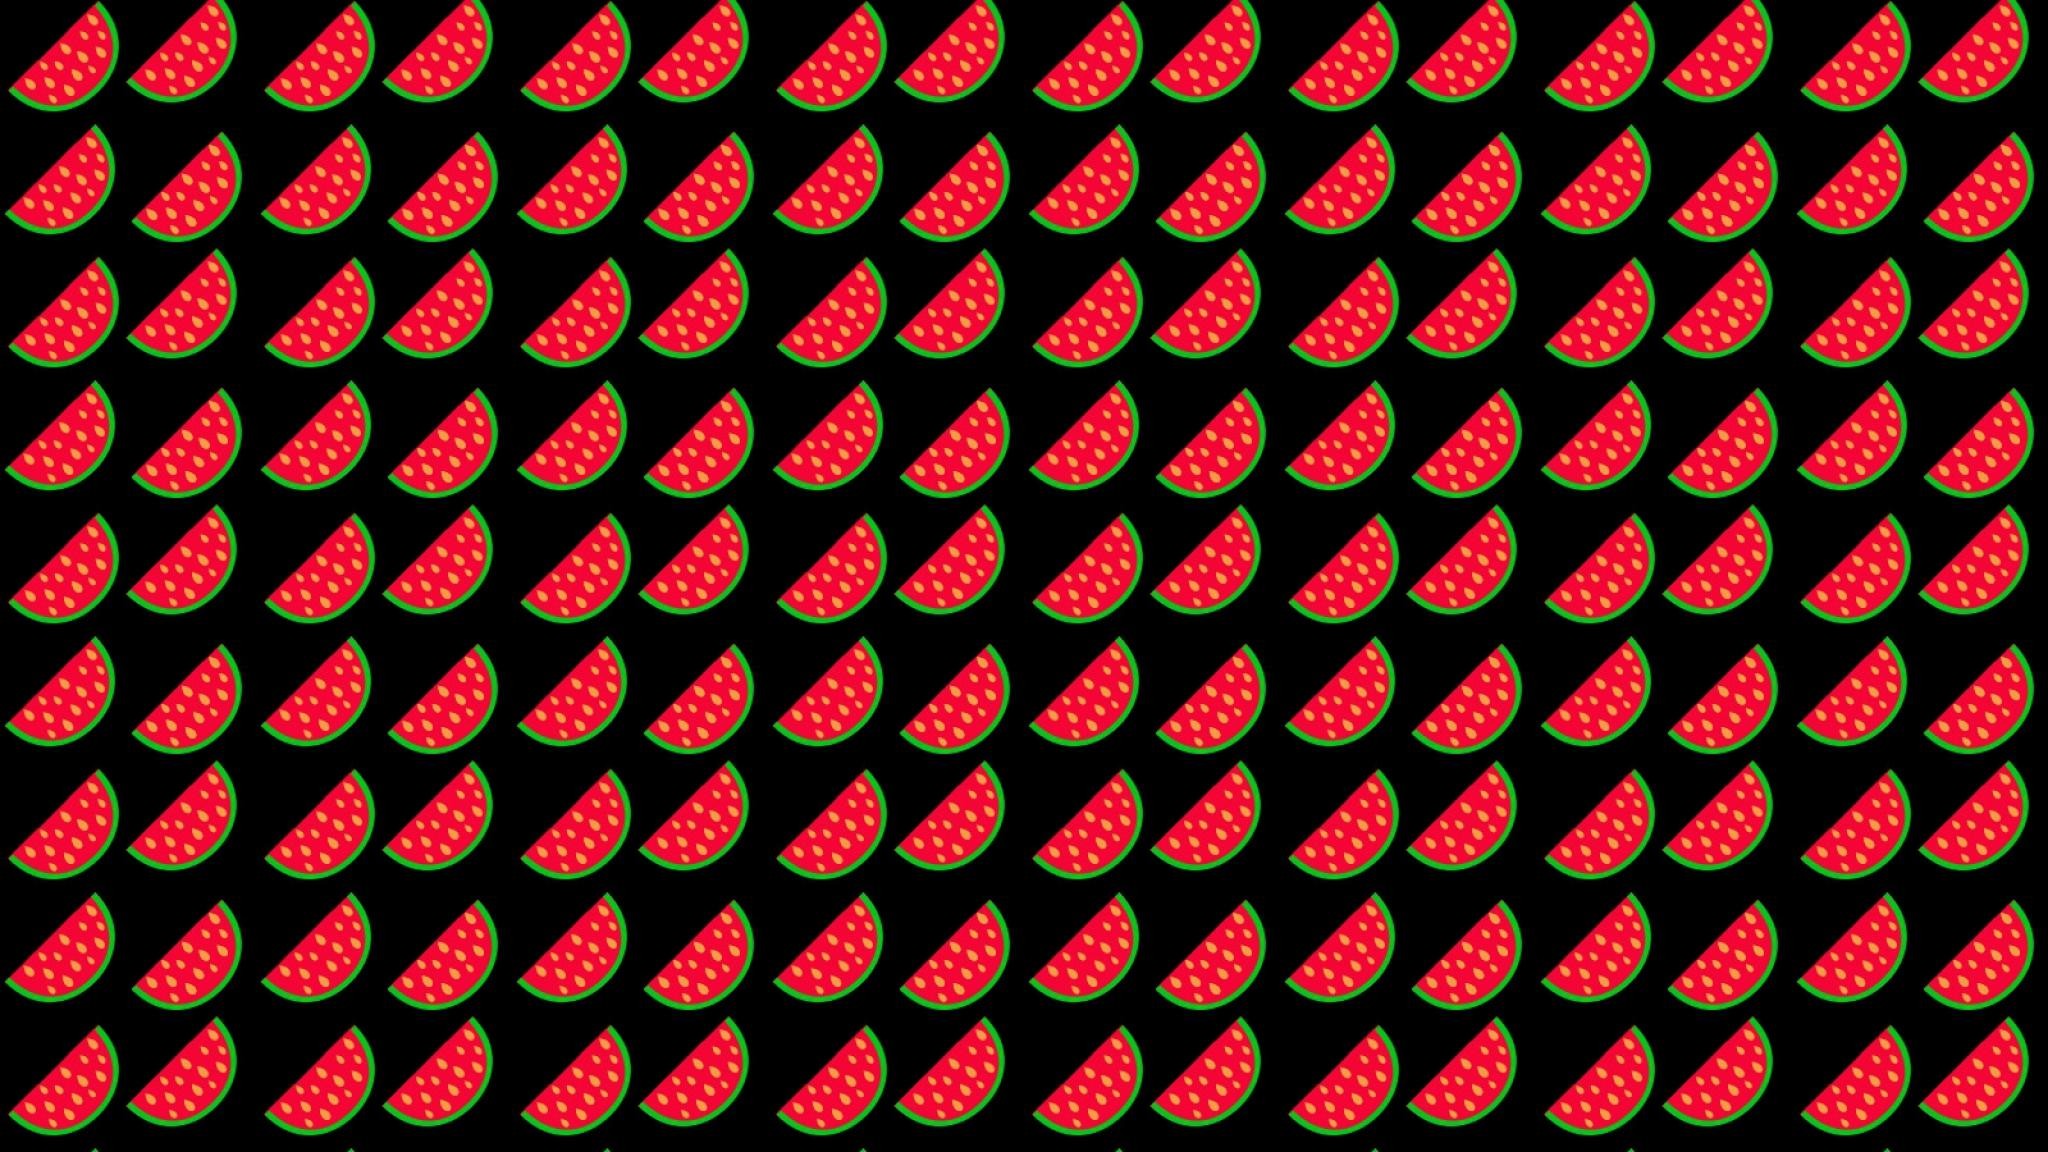 wallpaper.wiki-Watermelon-Images-PIC-WPE003765